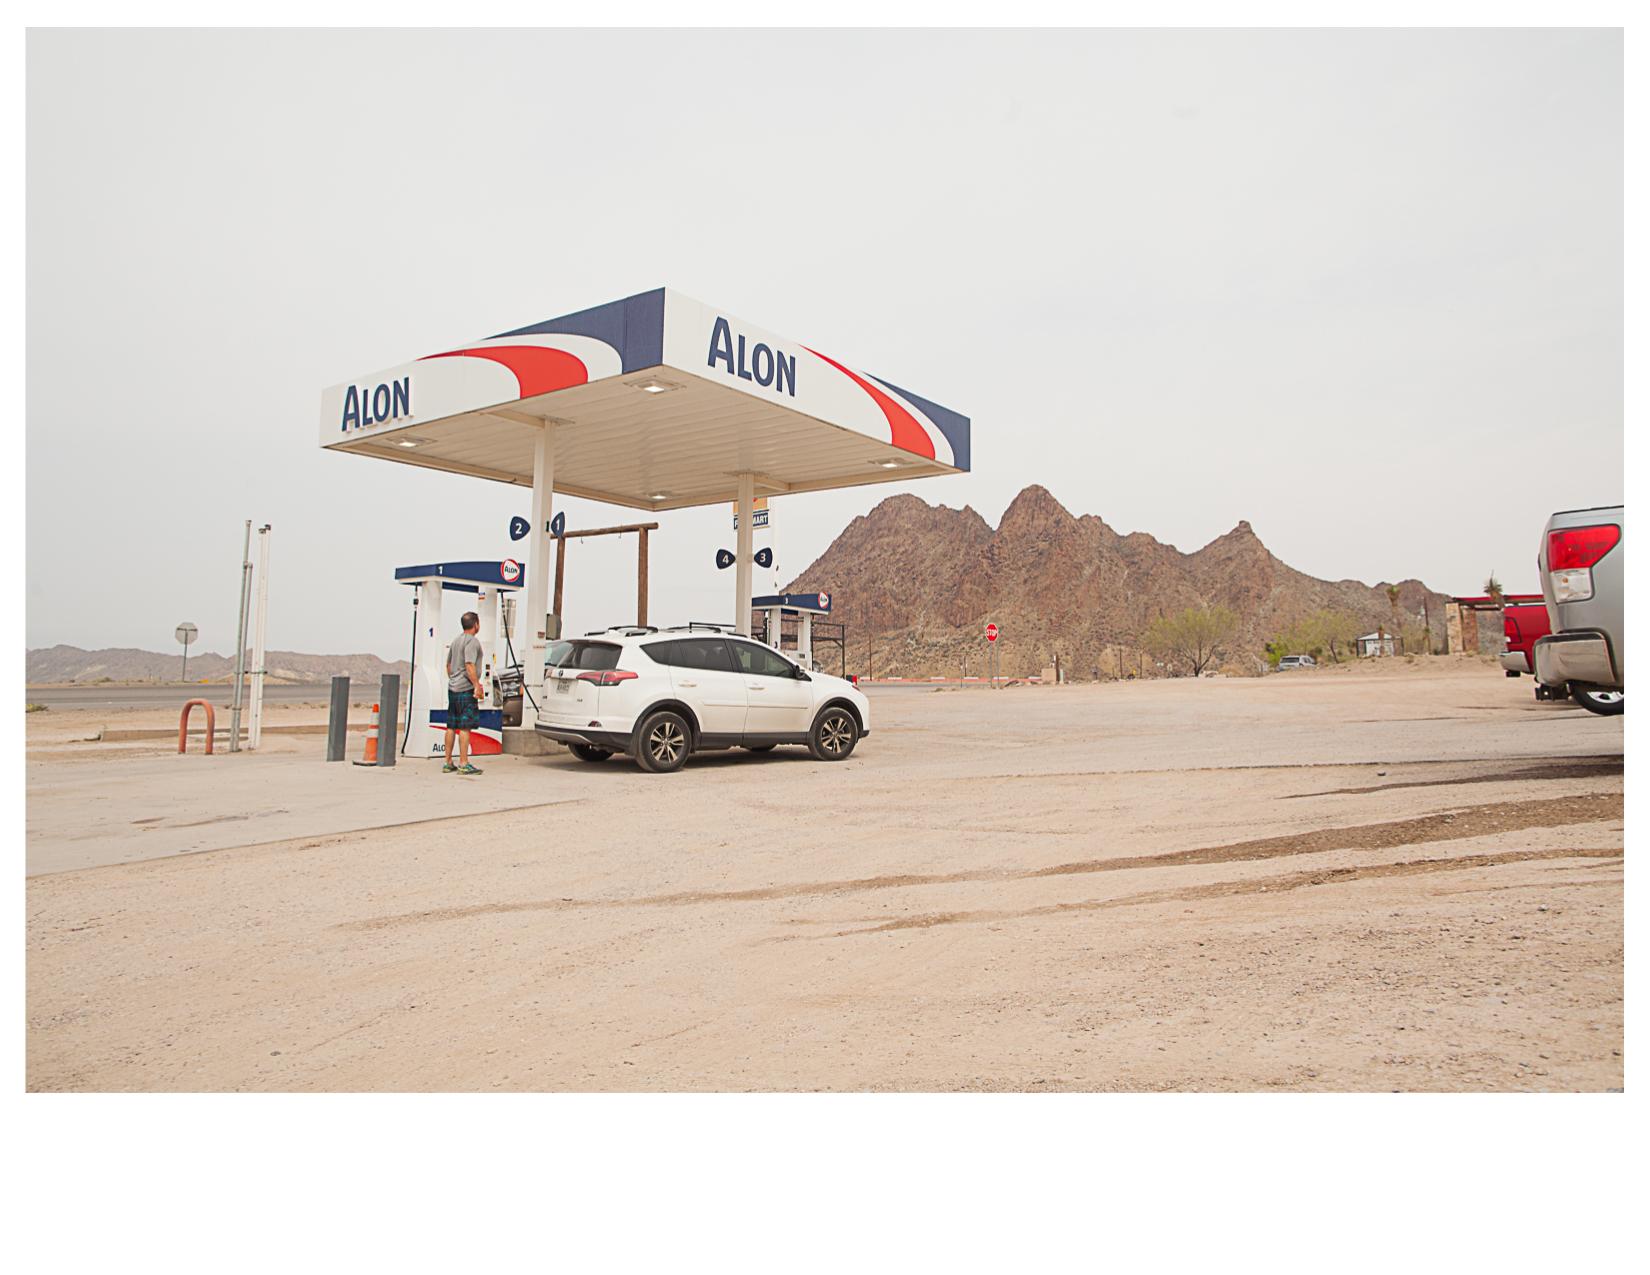 View of TX 118 from Alon Gas Station, Terlingua, TX